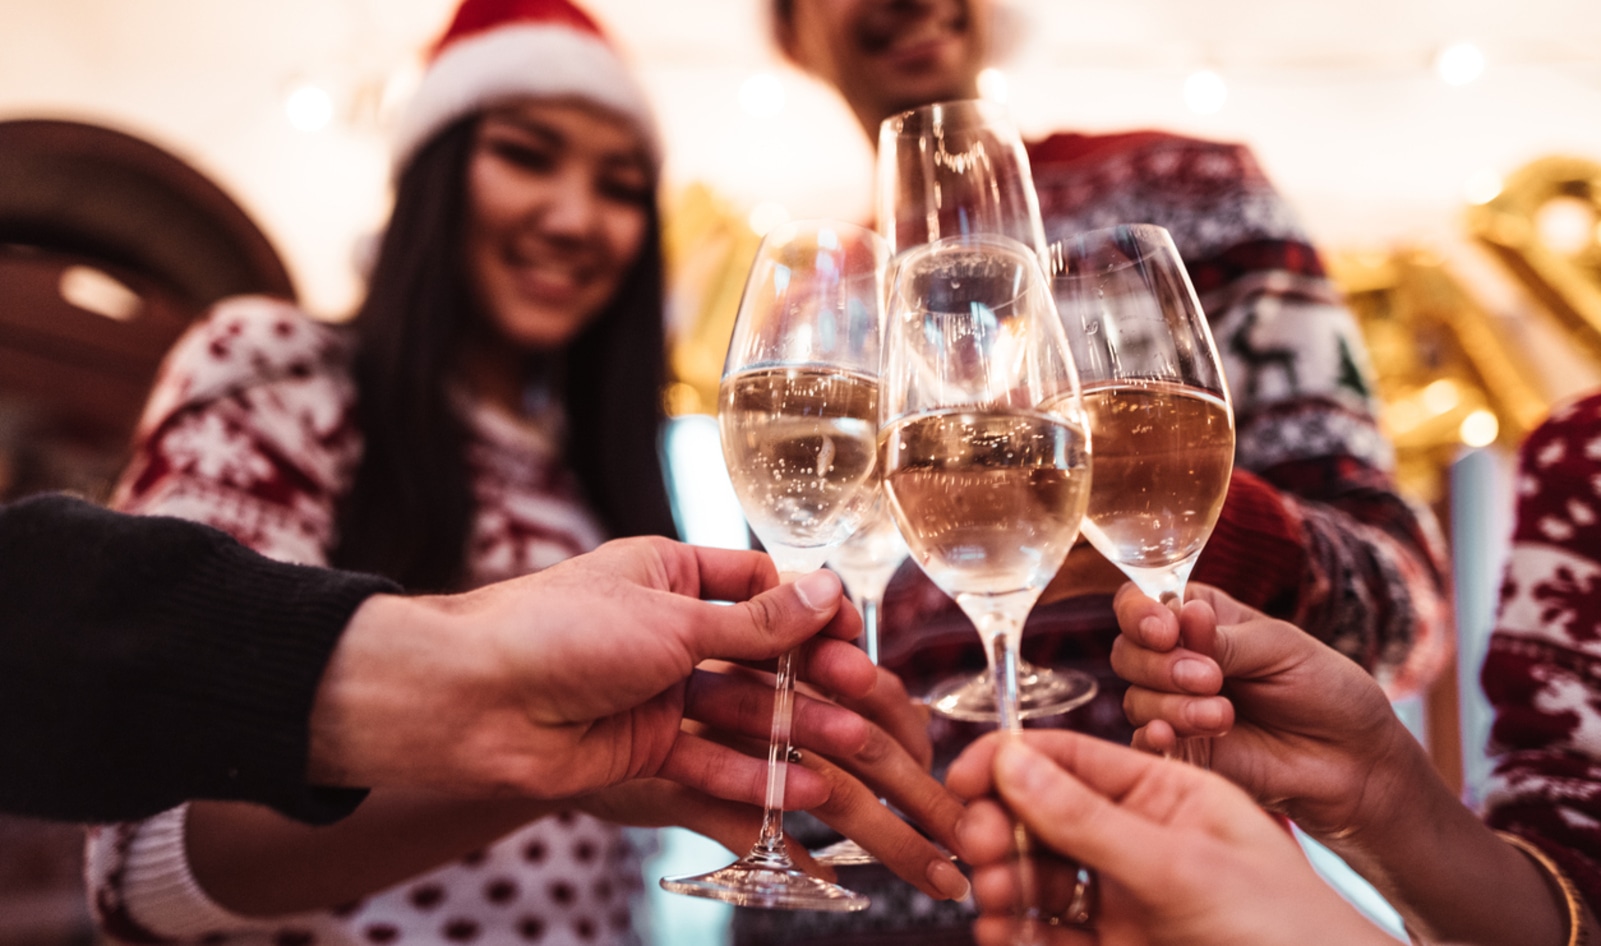 Vegan Champagne Brands, Sparkling Wines, and the Best Cocktails for the Holidays